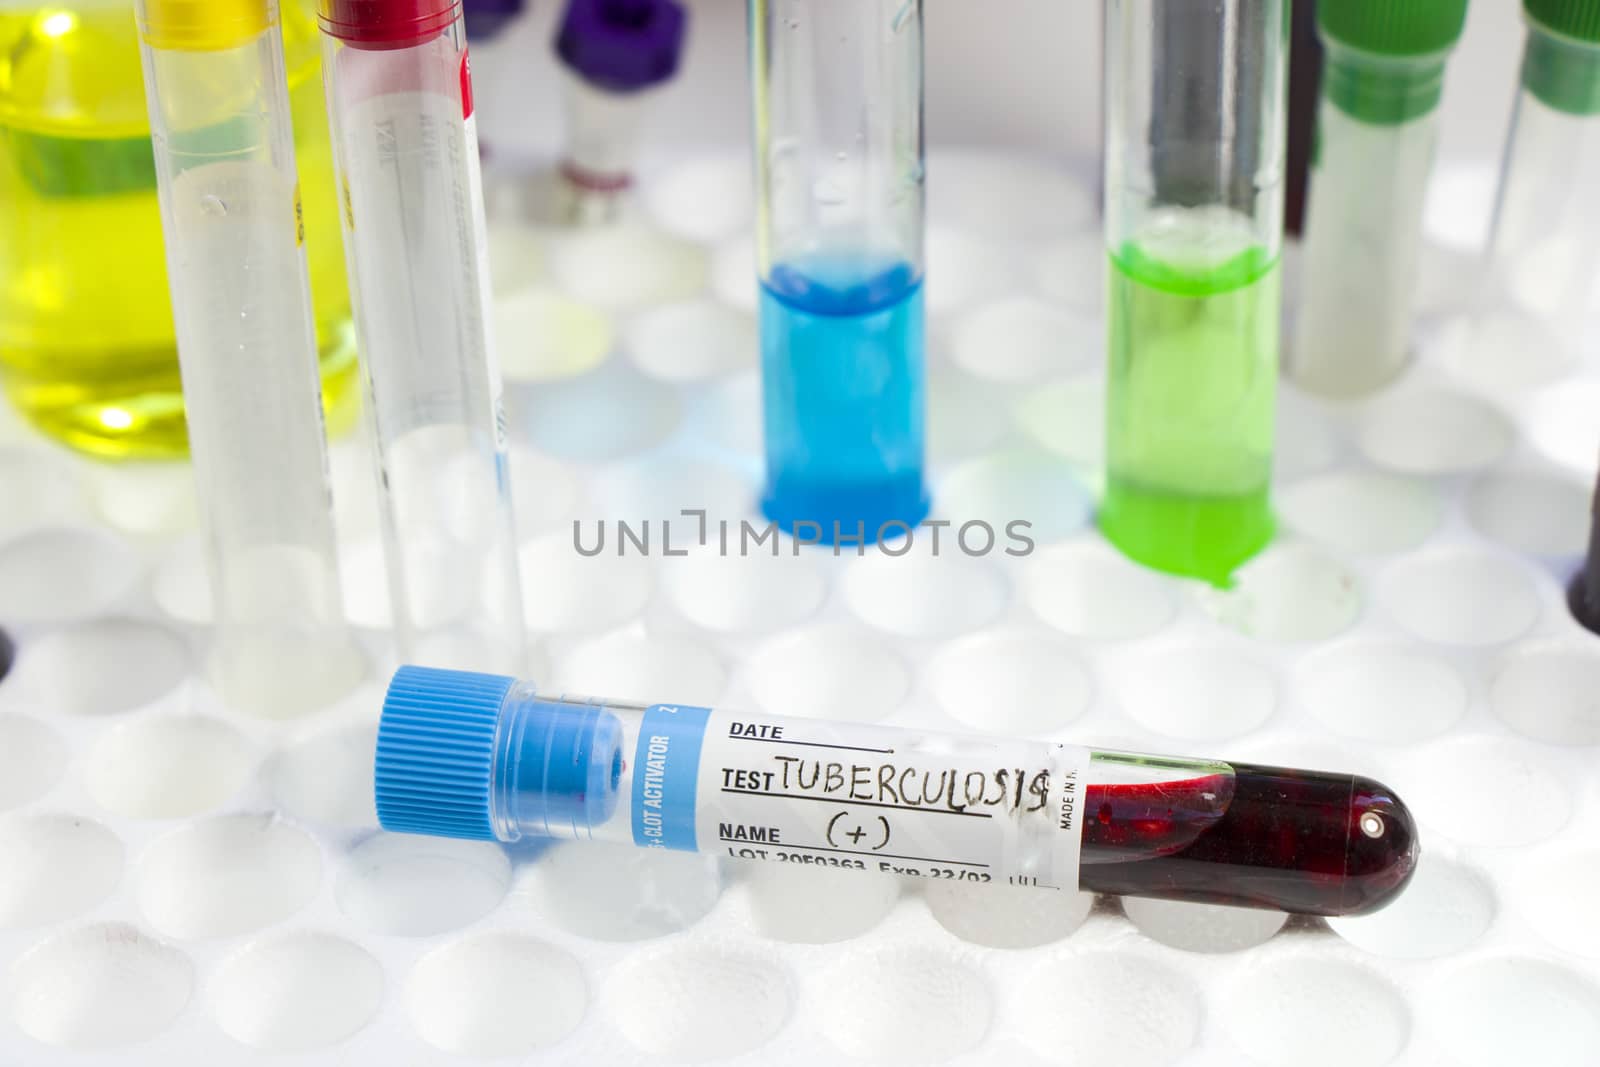 Tuberculosis blood test tube, laboratory and diagnoses